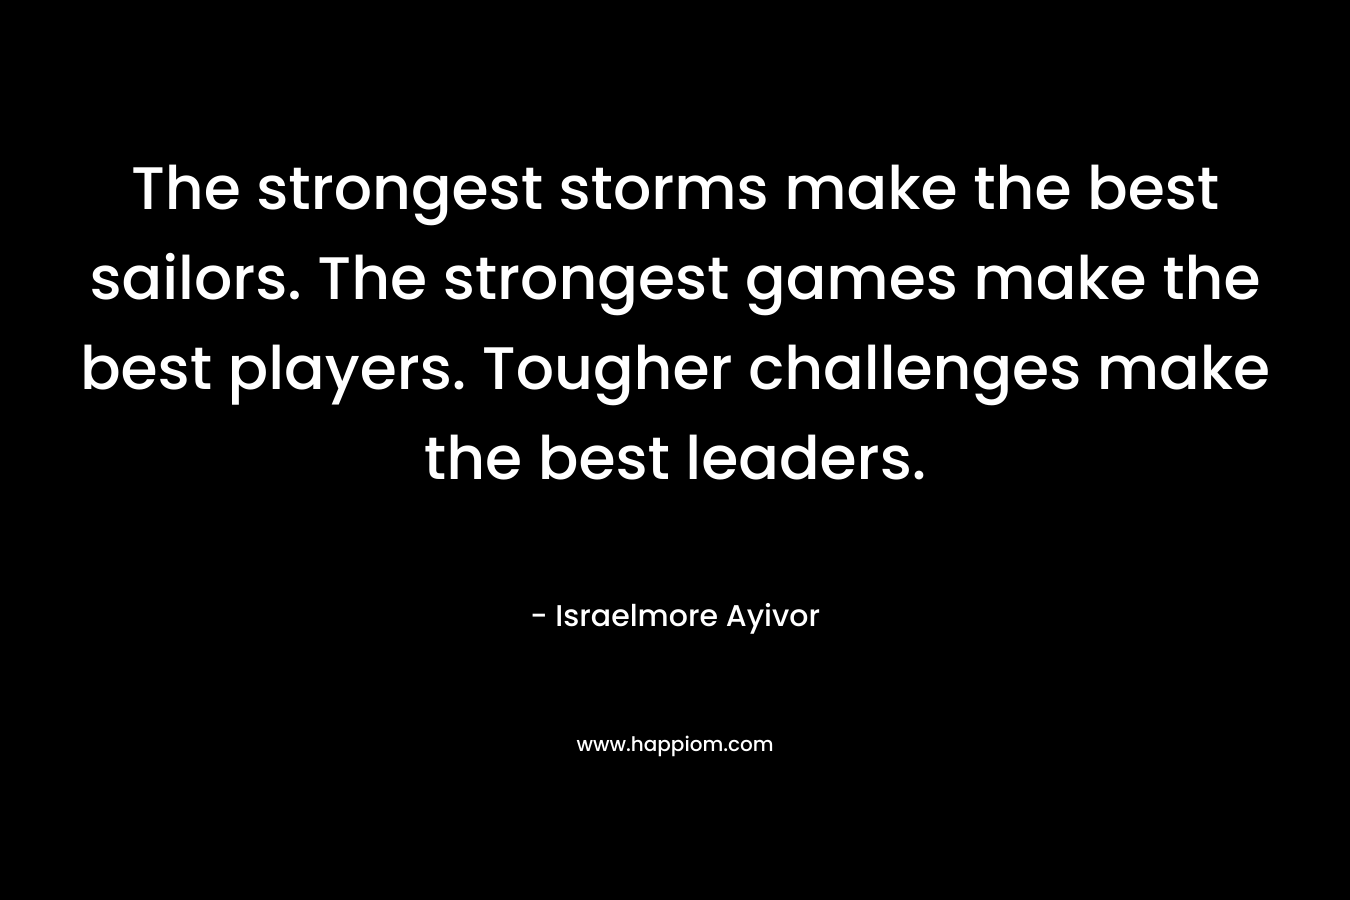 The strongest storms make the best sailors. The strongest games make the best players. Tougher challenges make the best leaders.